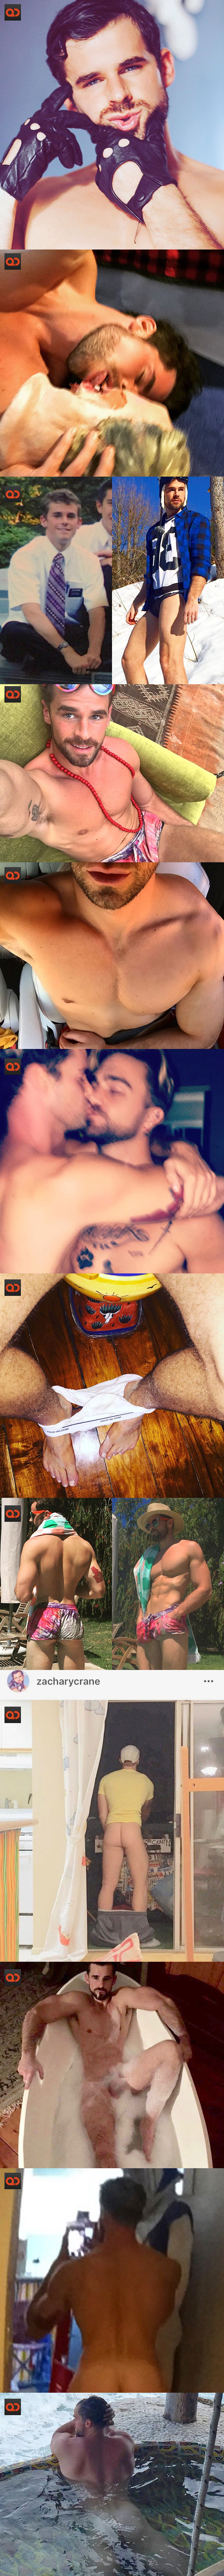 Zachary Crane, Model And Plastic Artist, Cock Exposed In Alleged Leaked Snap!